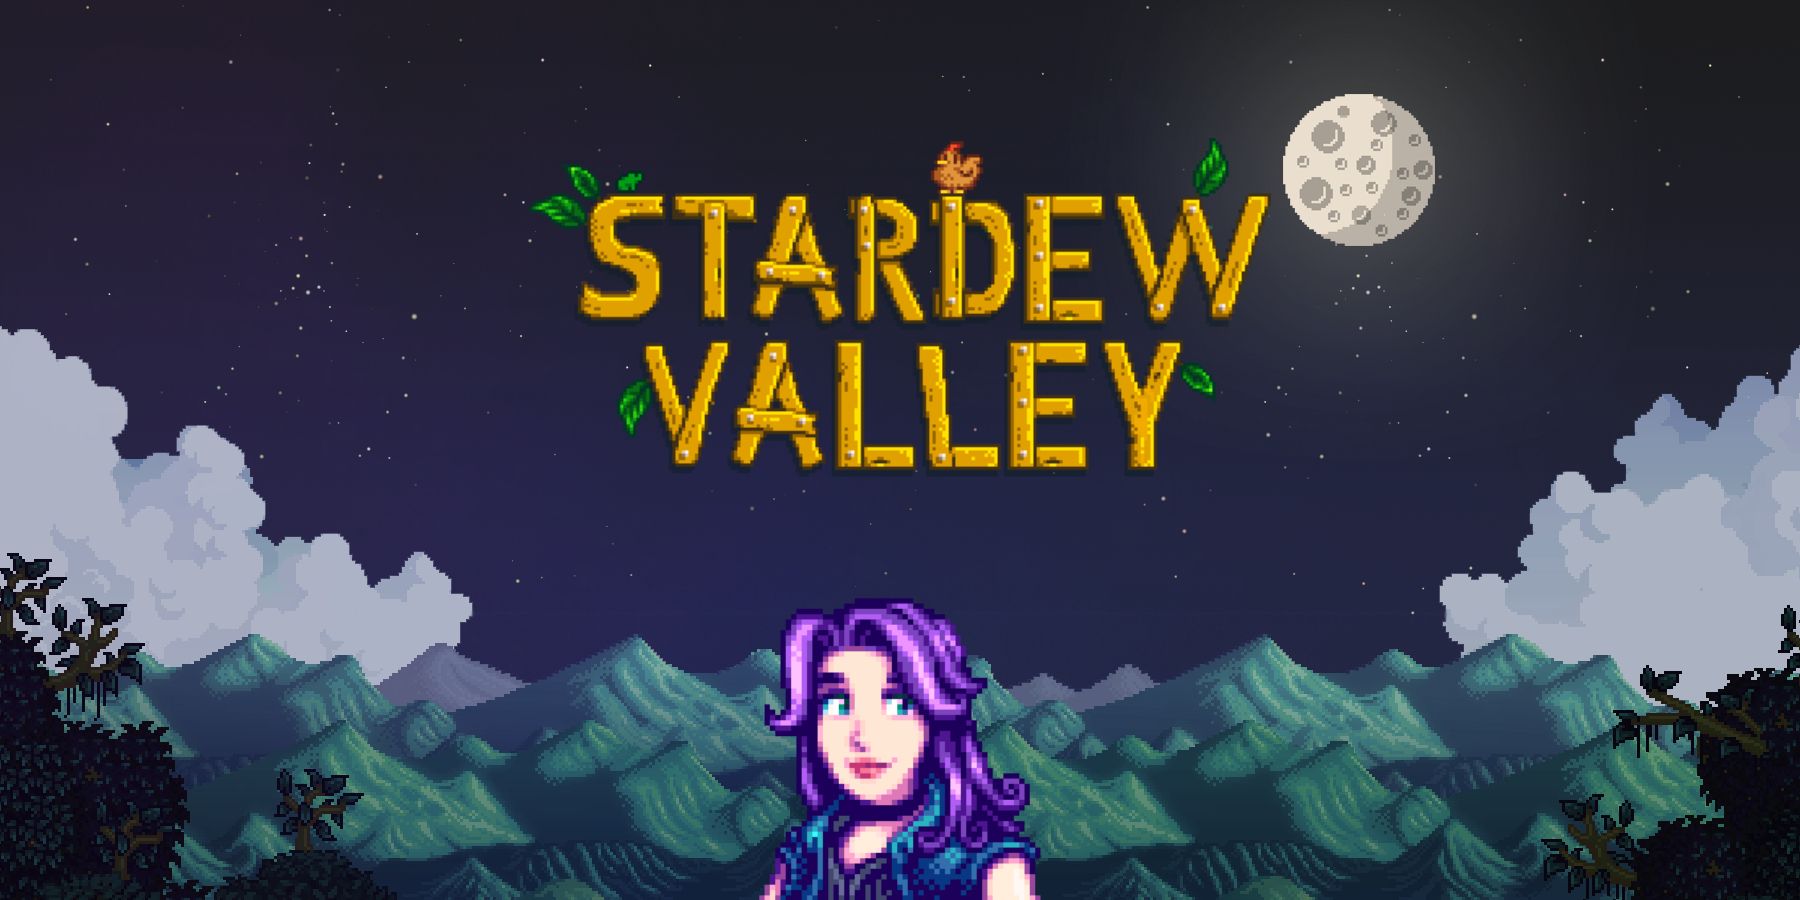 abigail on a moon-lit title screen of Stardew Valley